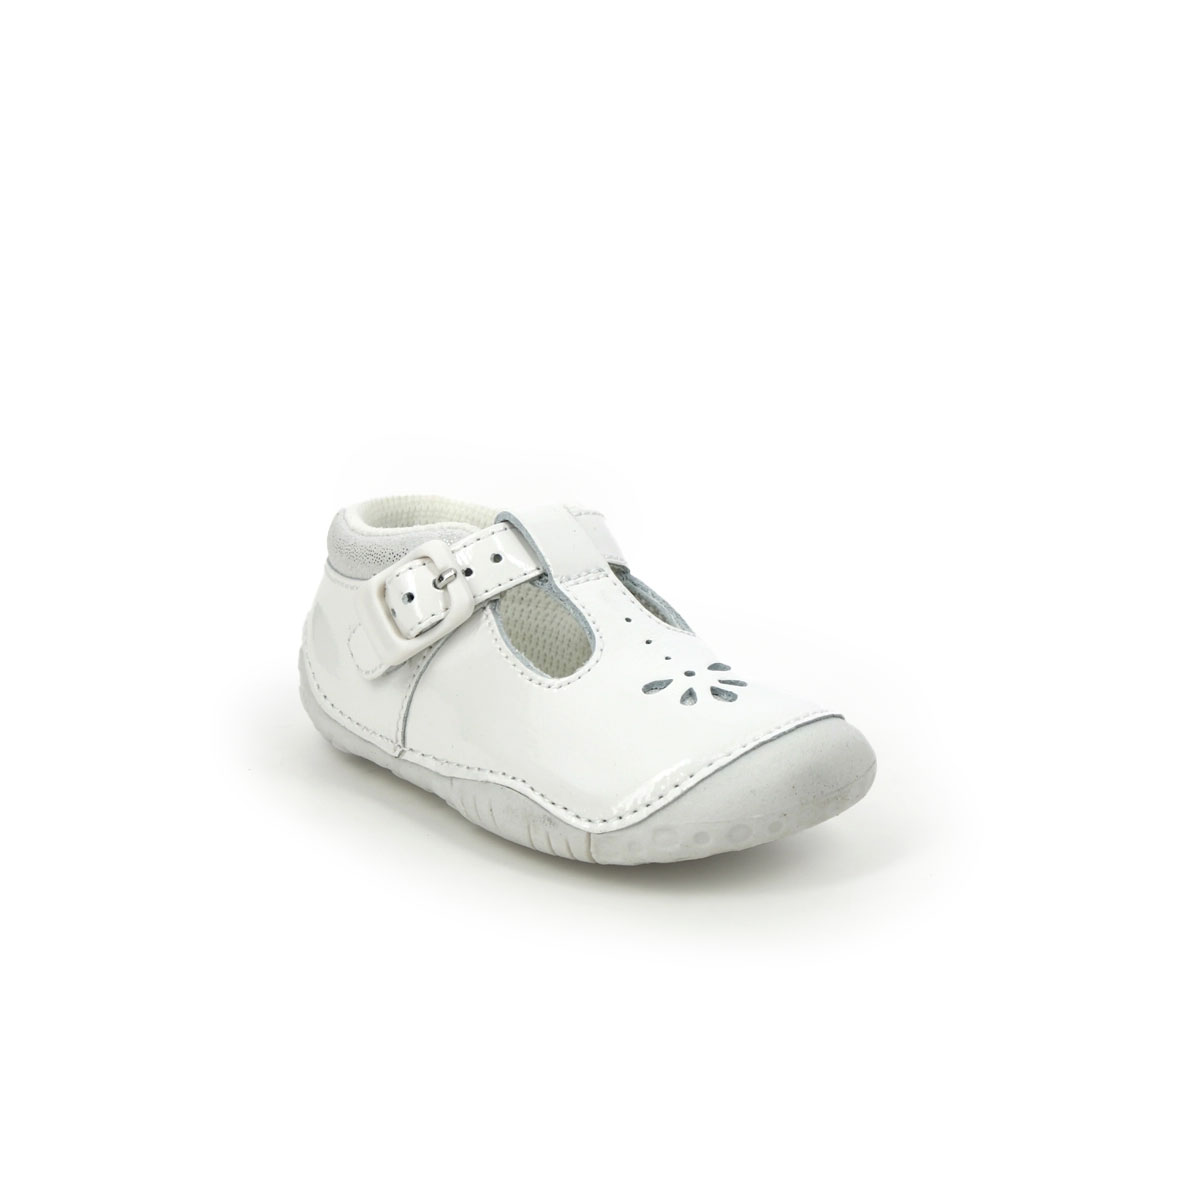 Start Rite - Baby Bubble In White Patent 0773-14F In Size 4 In Plain White Patent First And Baby Shoes  In White Patent For kids